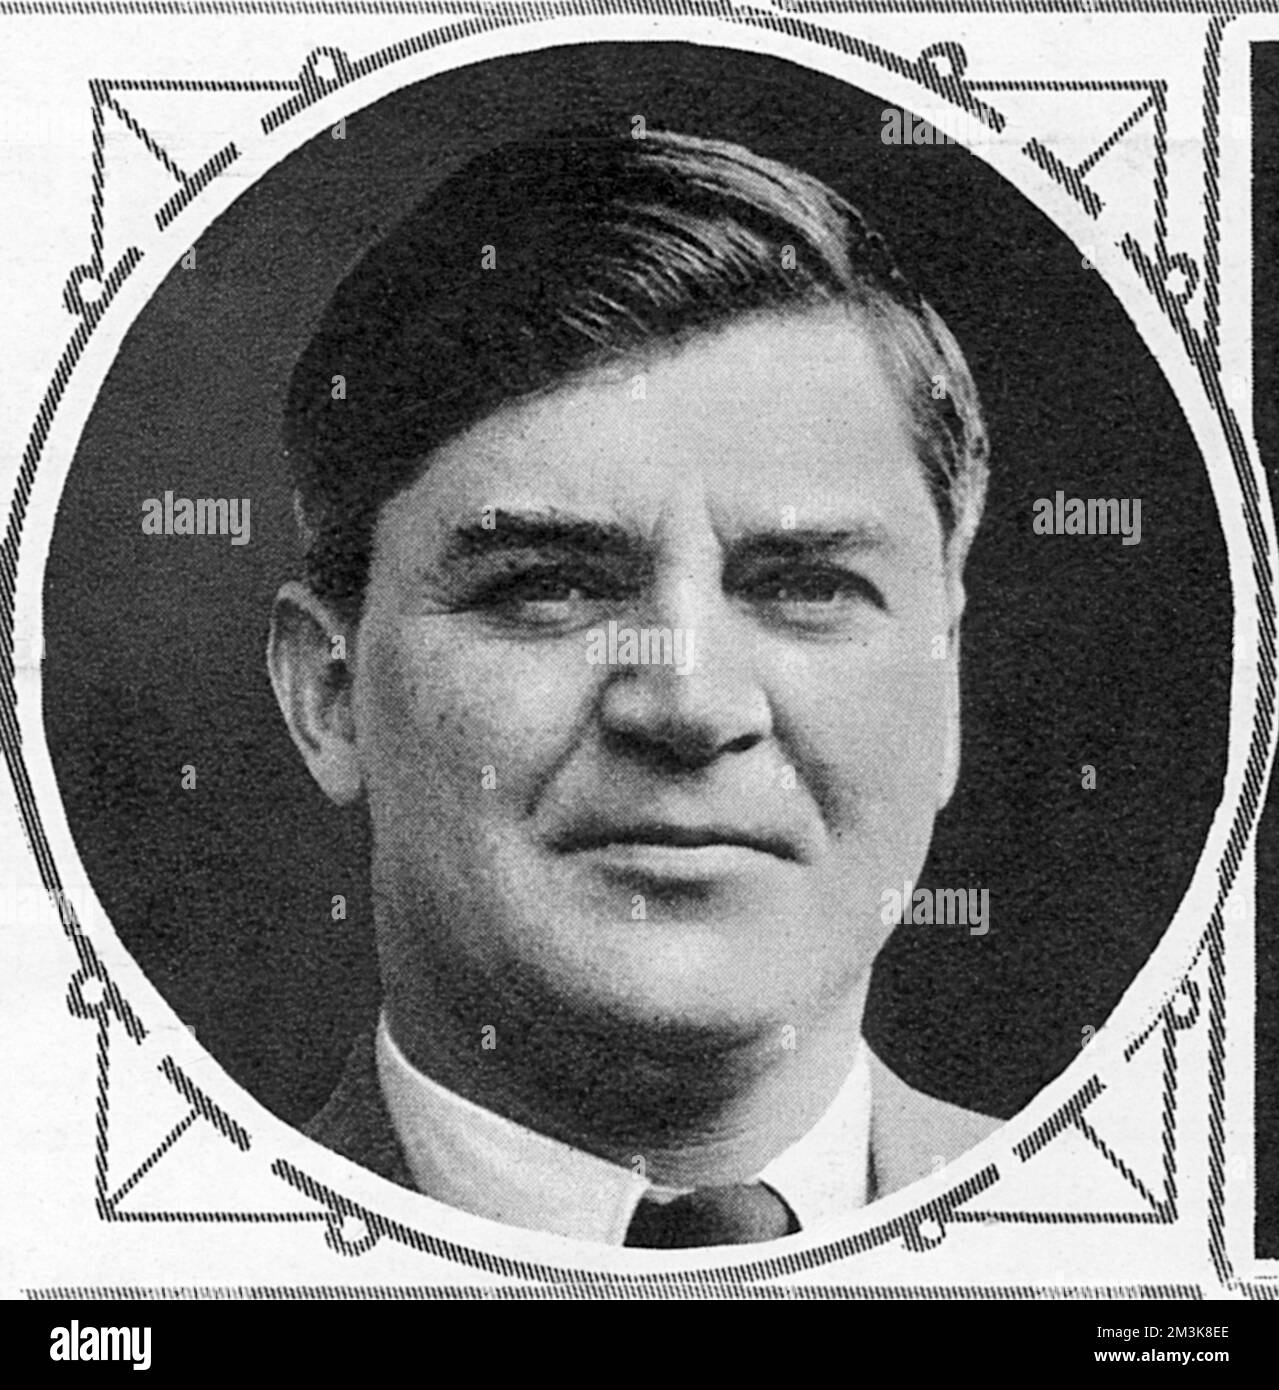 Mr Bevan was a Welsh Labour politician and was appointed as Minister of Health after Labour won the election in 1945. He was the founder of the National Health Service which came into effect on 5th July 1948. Stock Photo